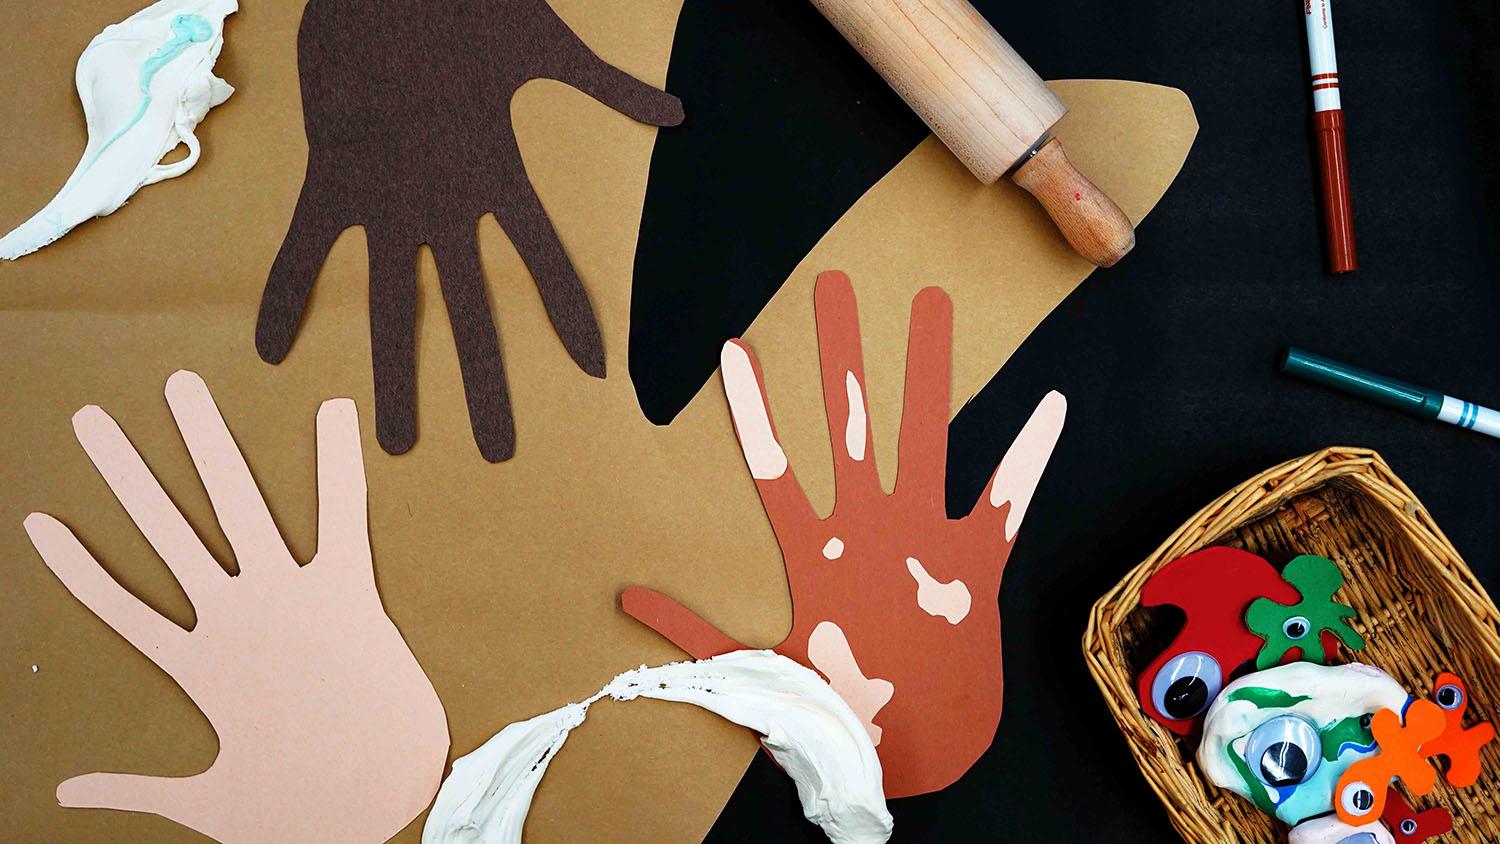 Construction paper hands and a basket containing 'germs' made of clay, paper, and googly eyes